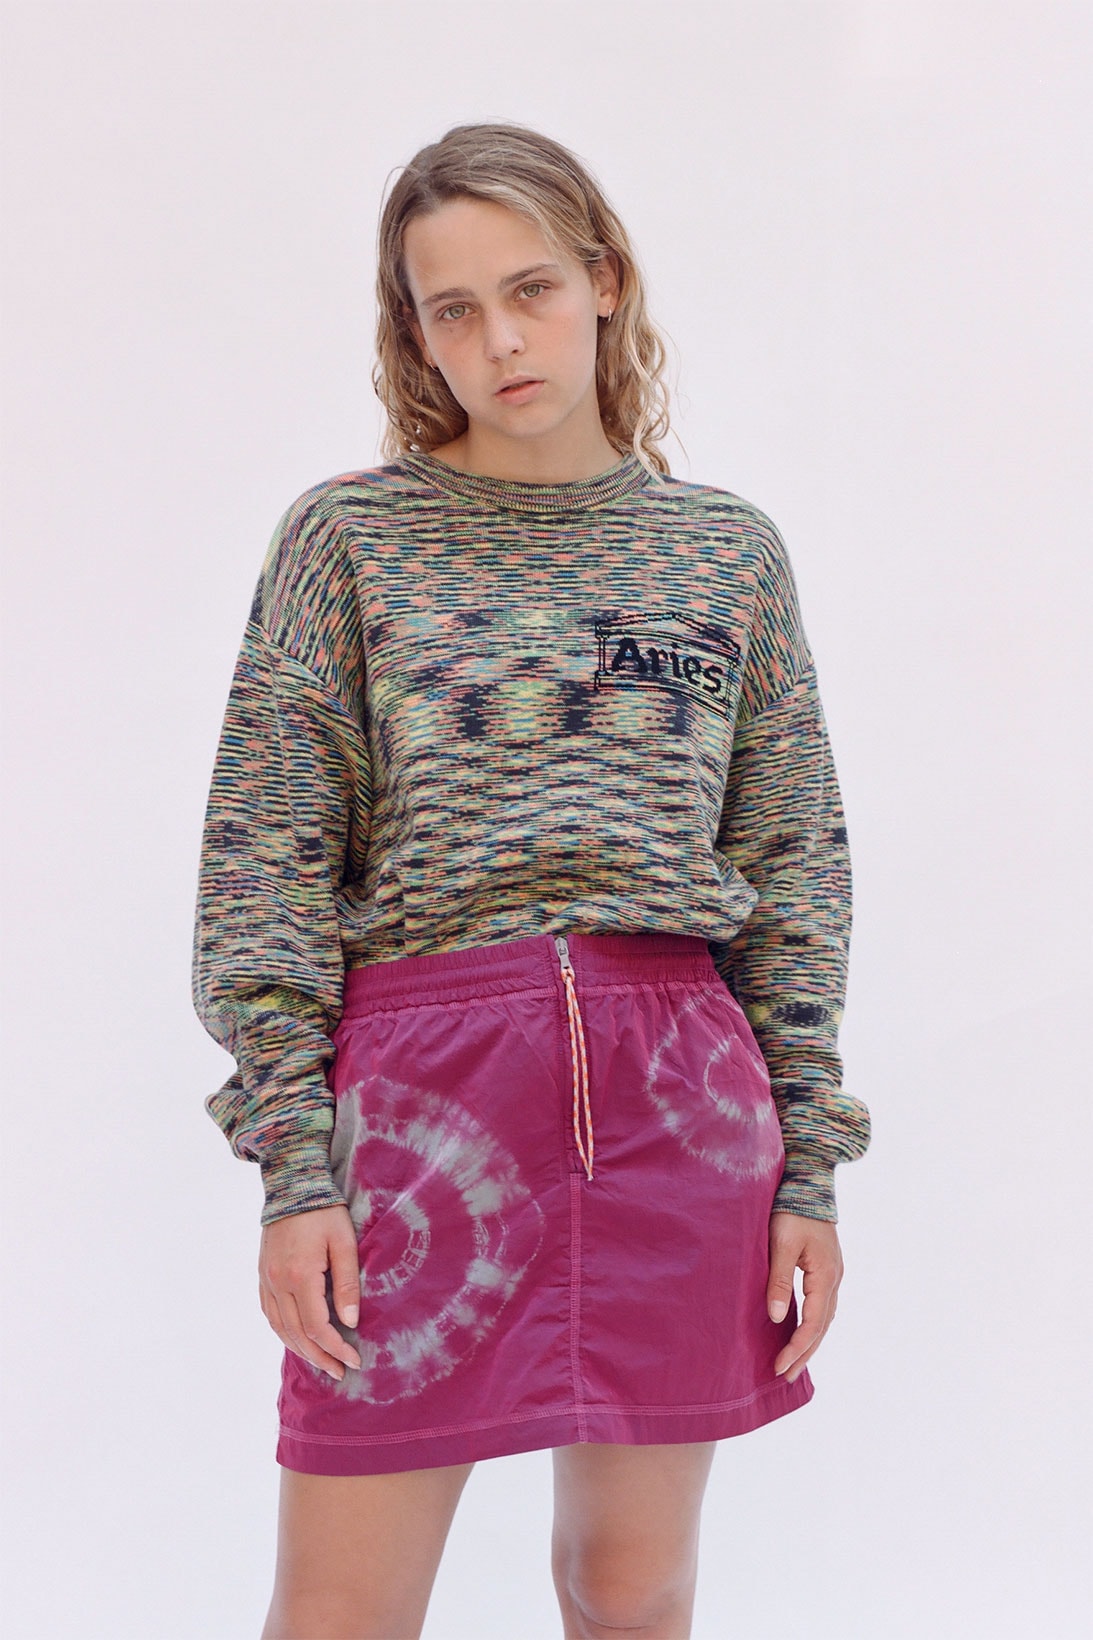 aries spring summer ss21 collection lookbook pattern knit sweater purple pink skirt